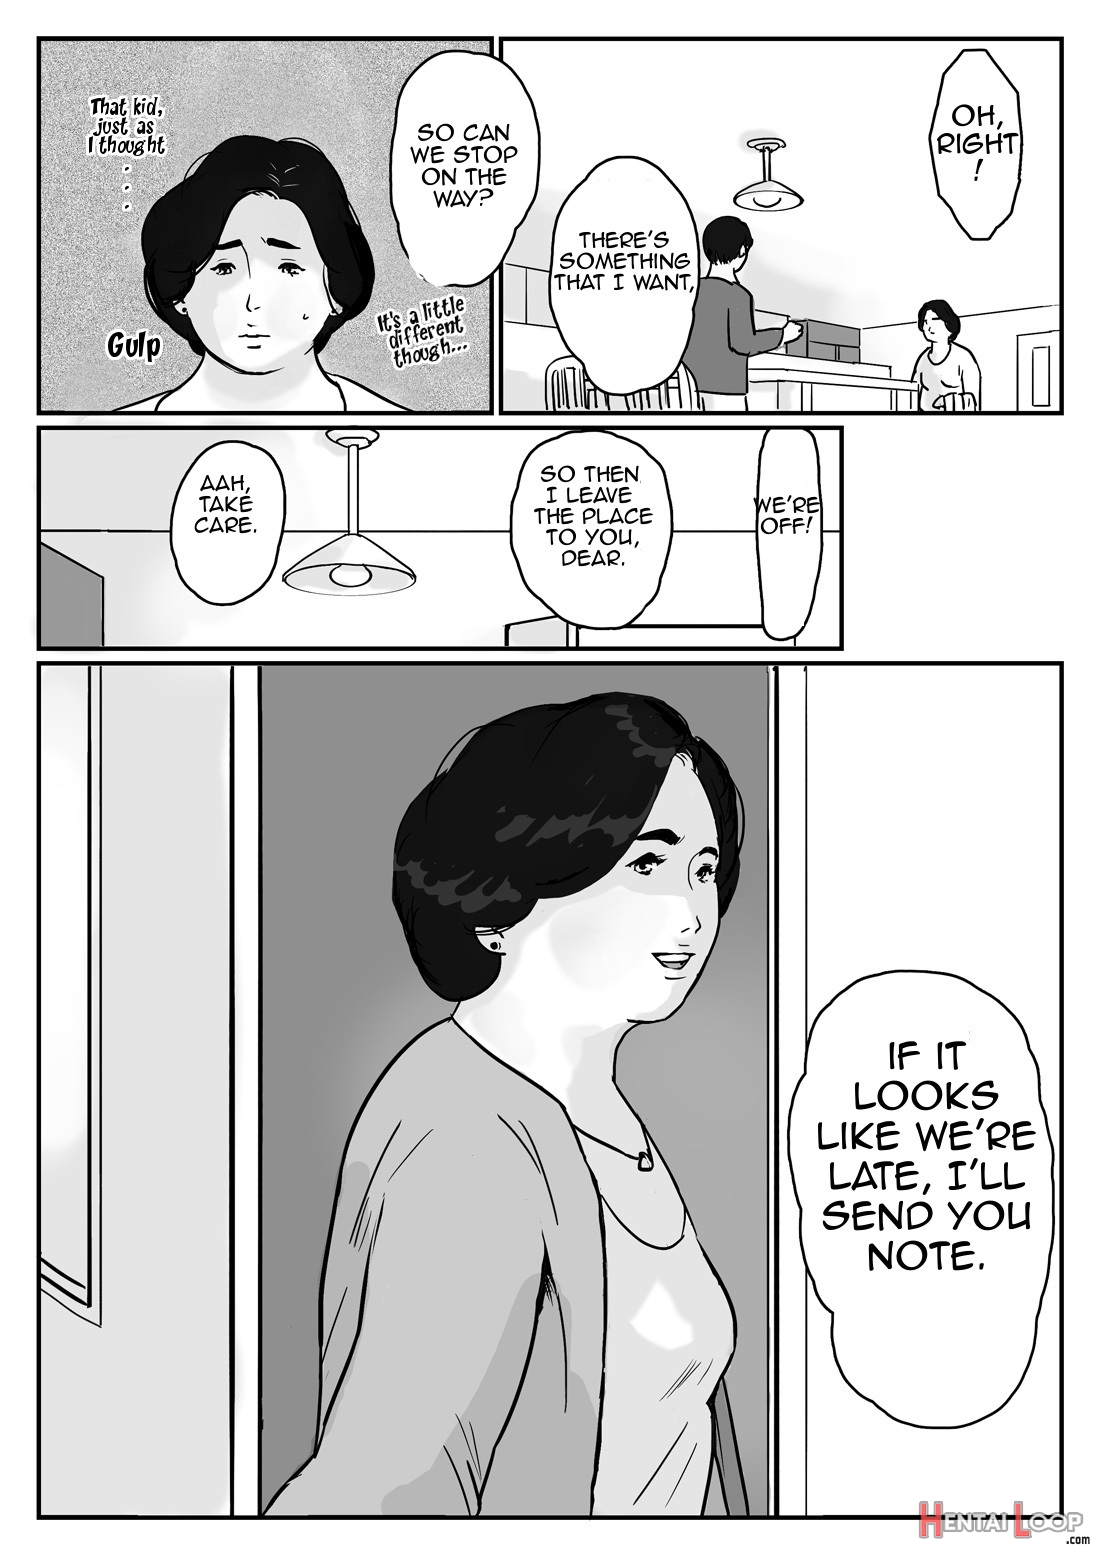 Fated Relation Mother Kazumi 1 page 5